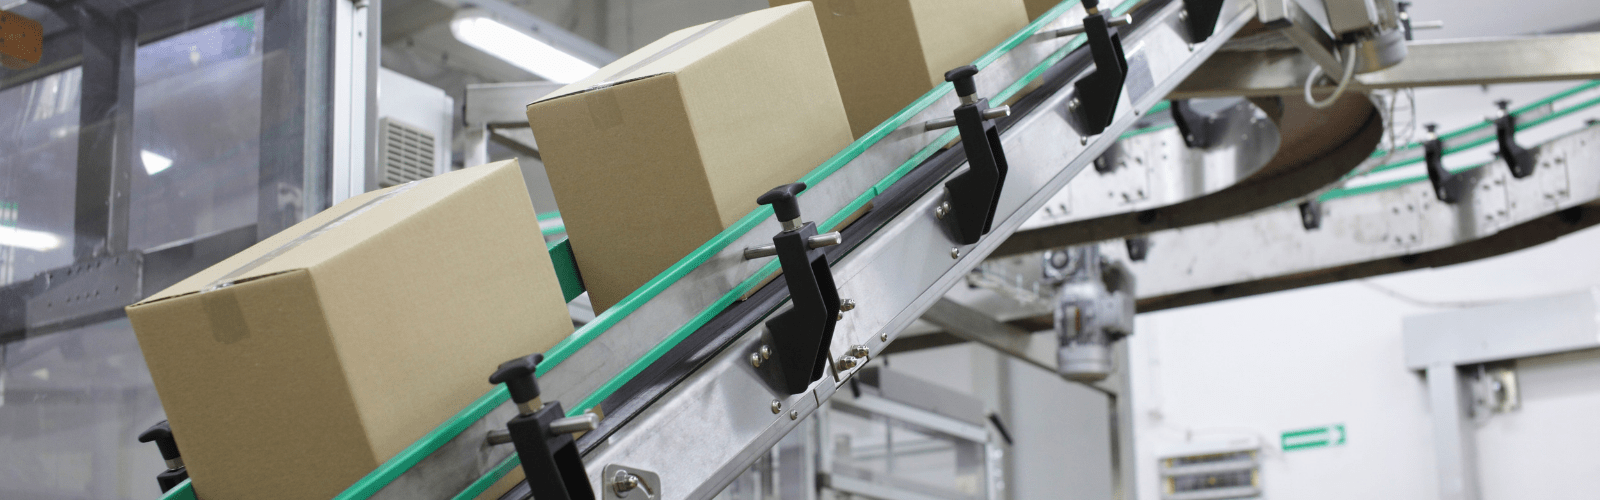 Package Testing Considerations for Large Retailers and their Suppliers